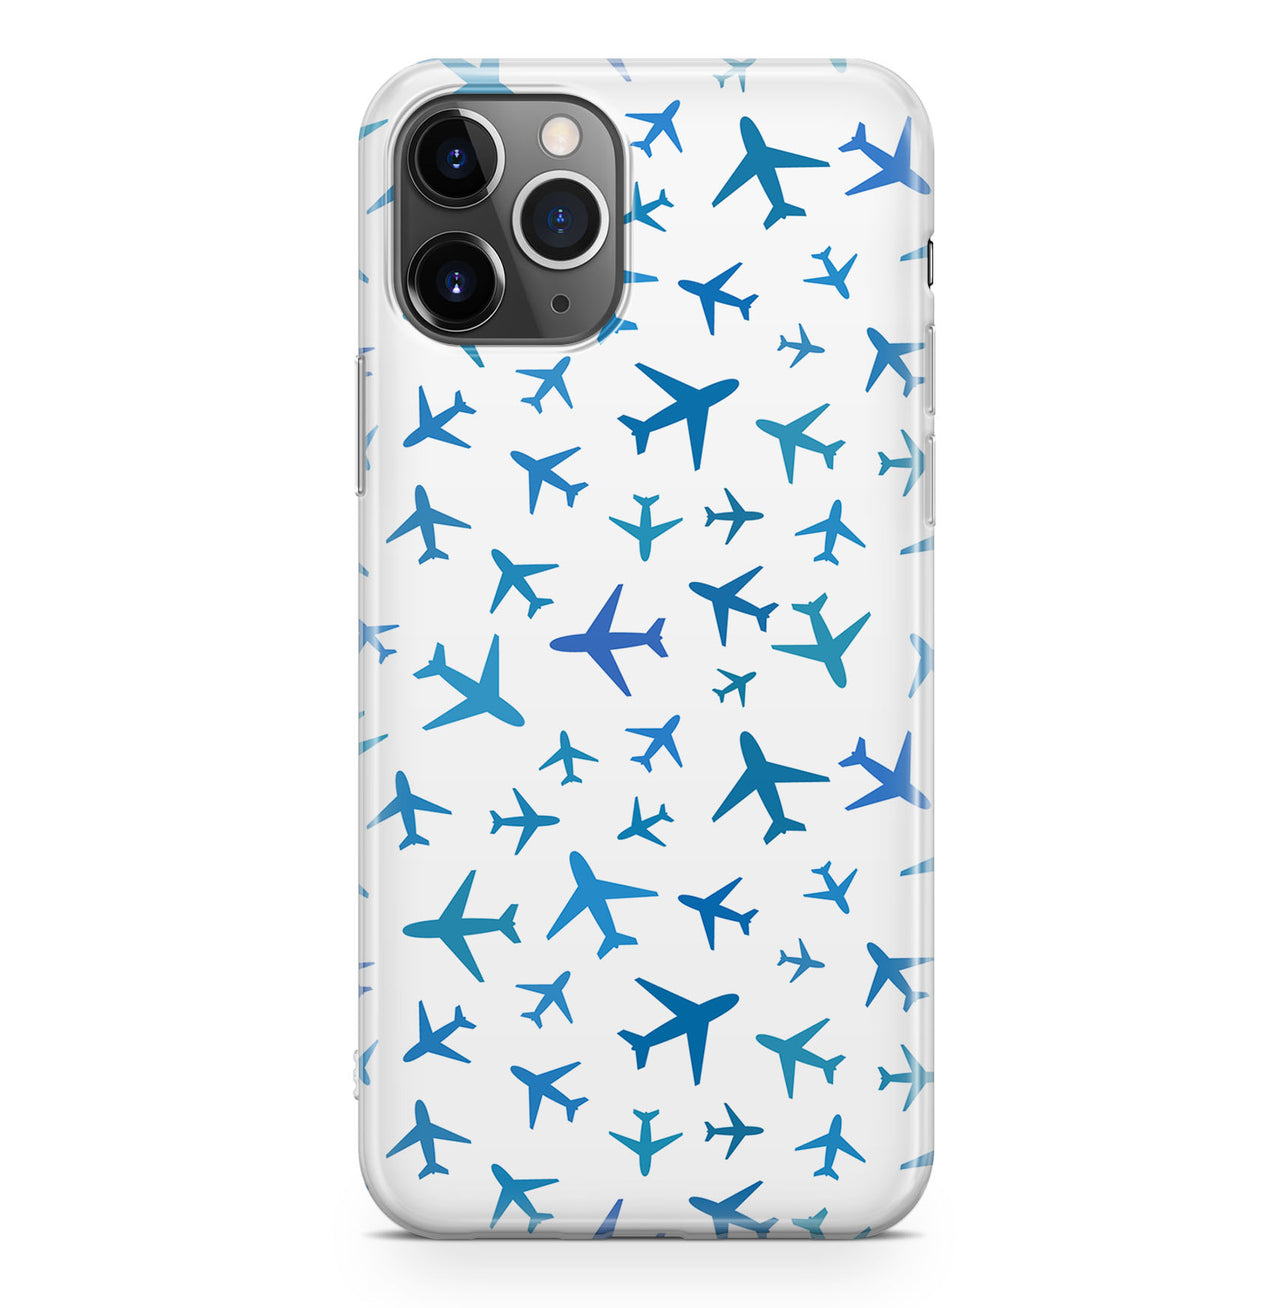 Many Airplanes Designed iPhone Cases